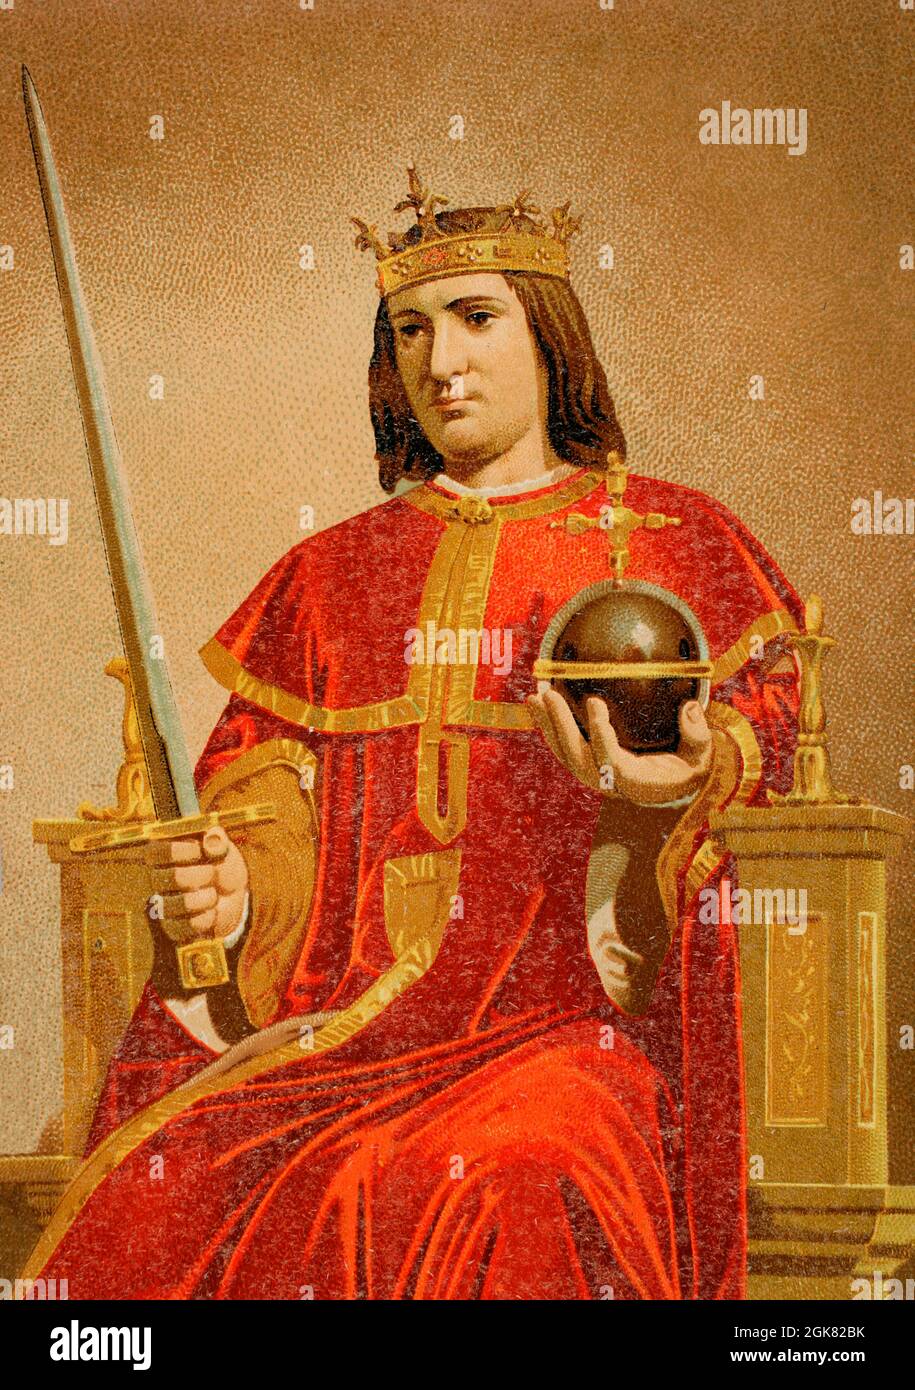 Ferdinand III of León and Castile, called the Saint (1199/1201-1252). King of Castile between 1217-1252 and King of León between 1230-1252. He unified the kingdoms of León and Castile. Chromolithography. Detail. Historia General de España (General History of Spain), by Miguel de Morayta. Volume II. Madrid, 1889. Stock Photo